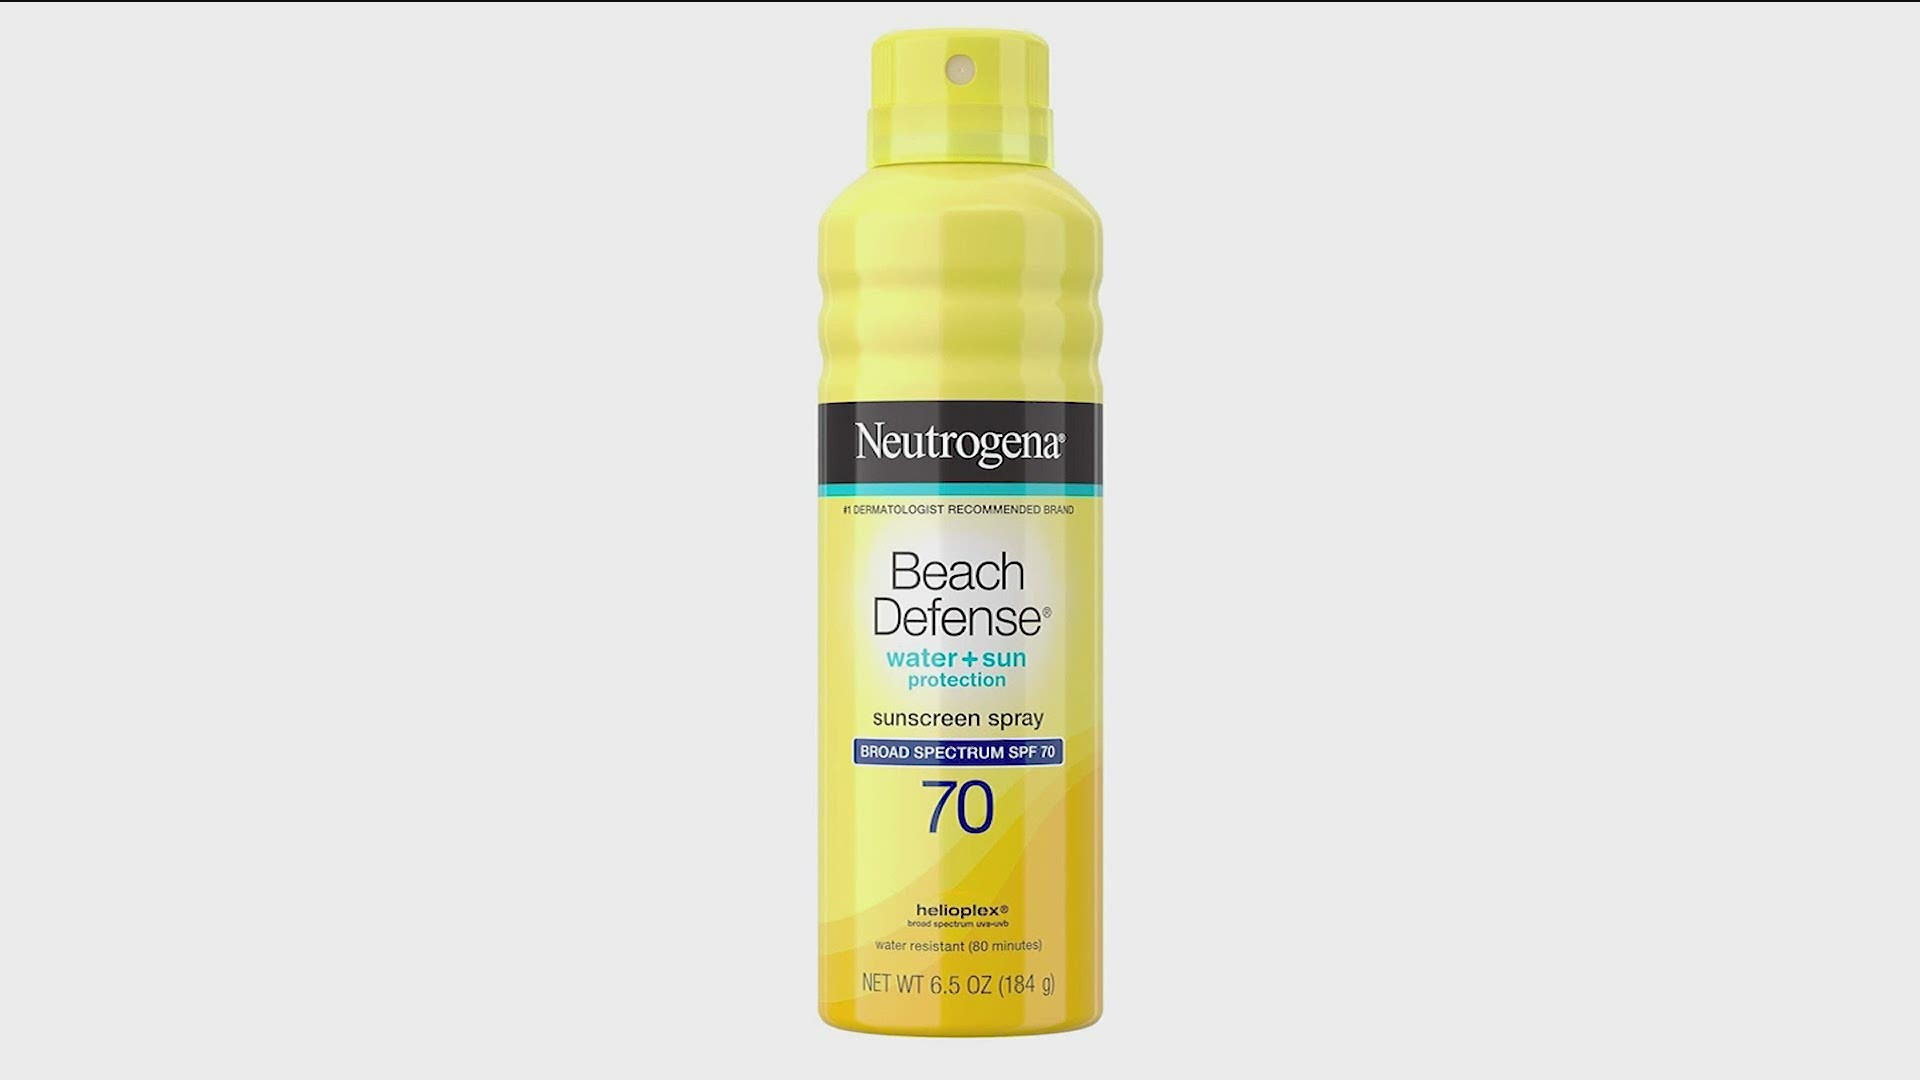 The five sunscreen products were shown to contain small amounts of benzene, a known carcinogen.